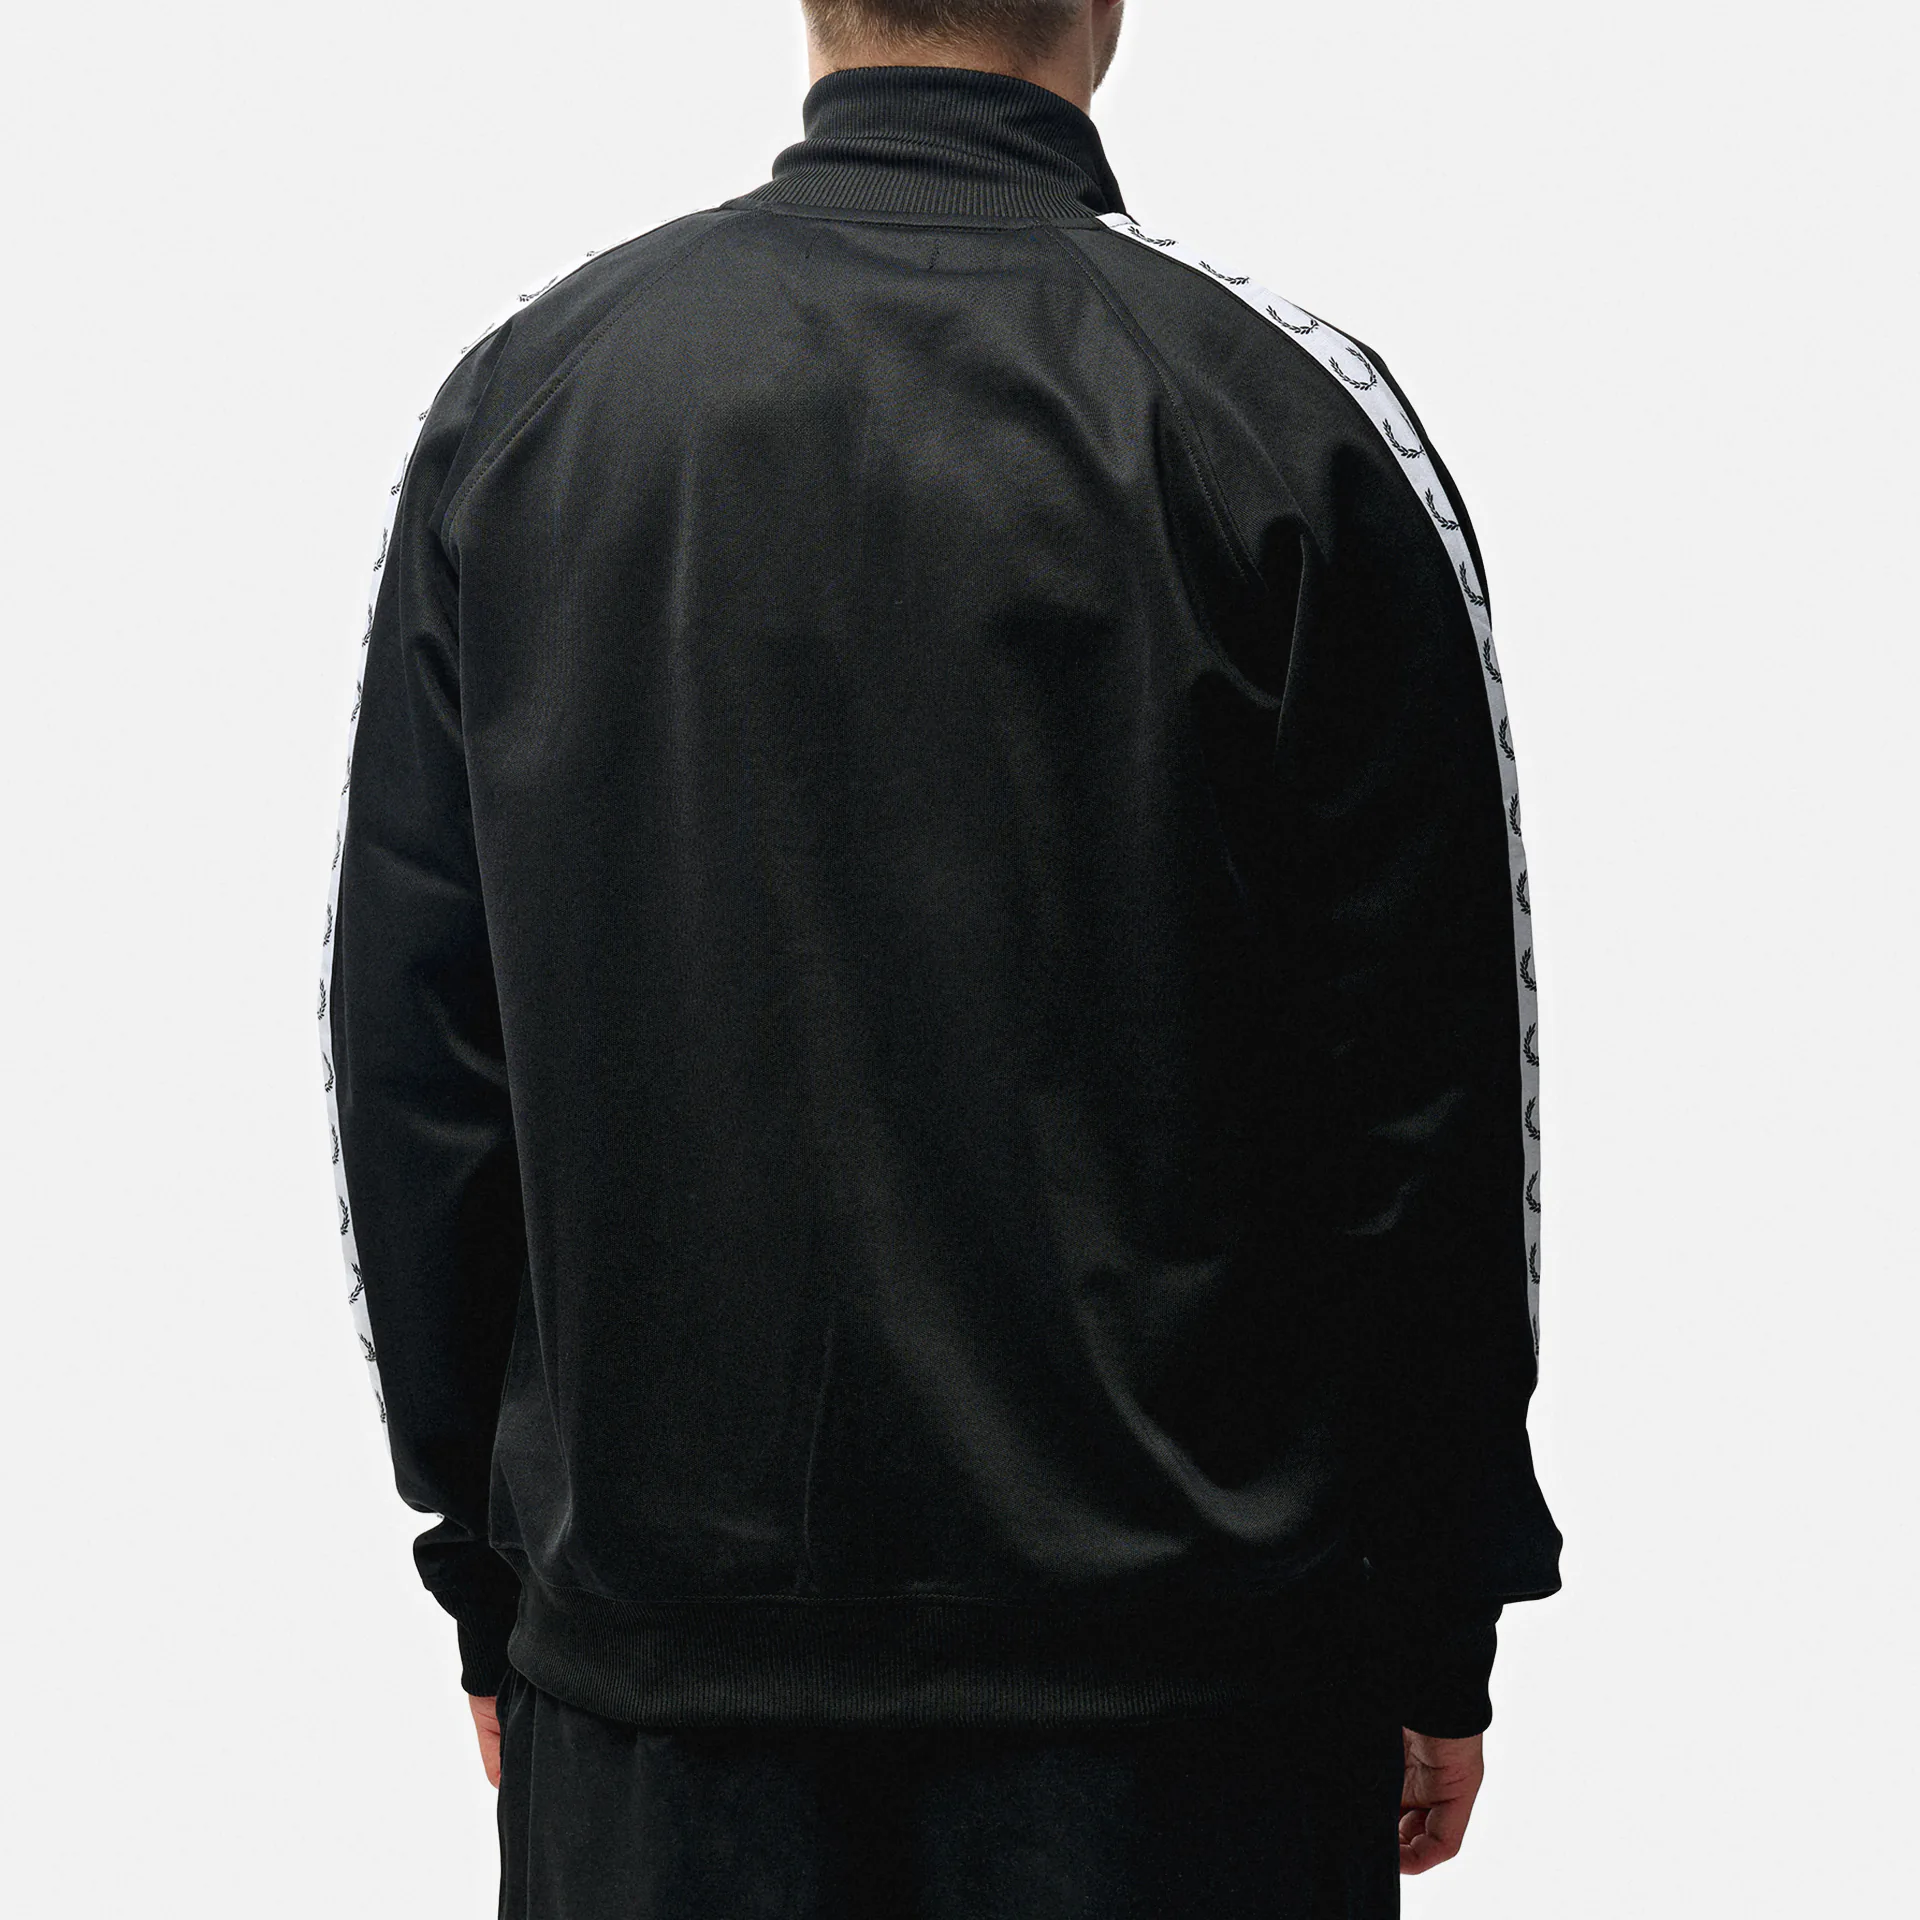 Fred Perry Taped Track Jacket Black